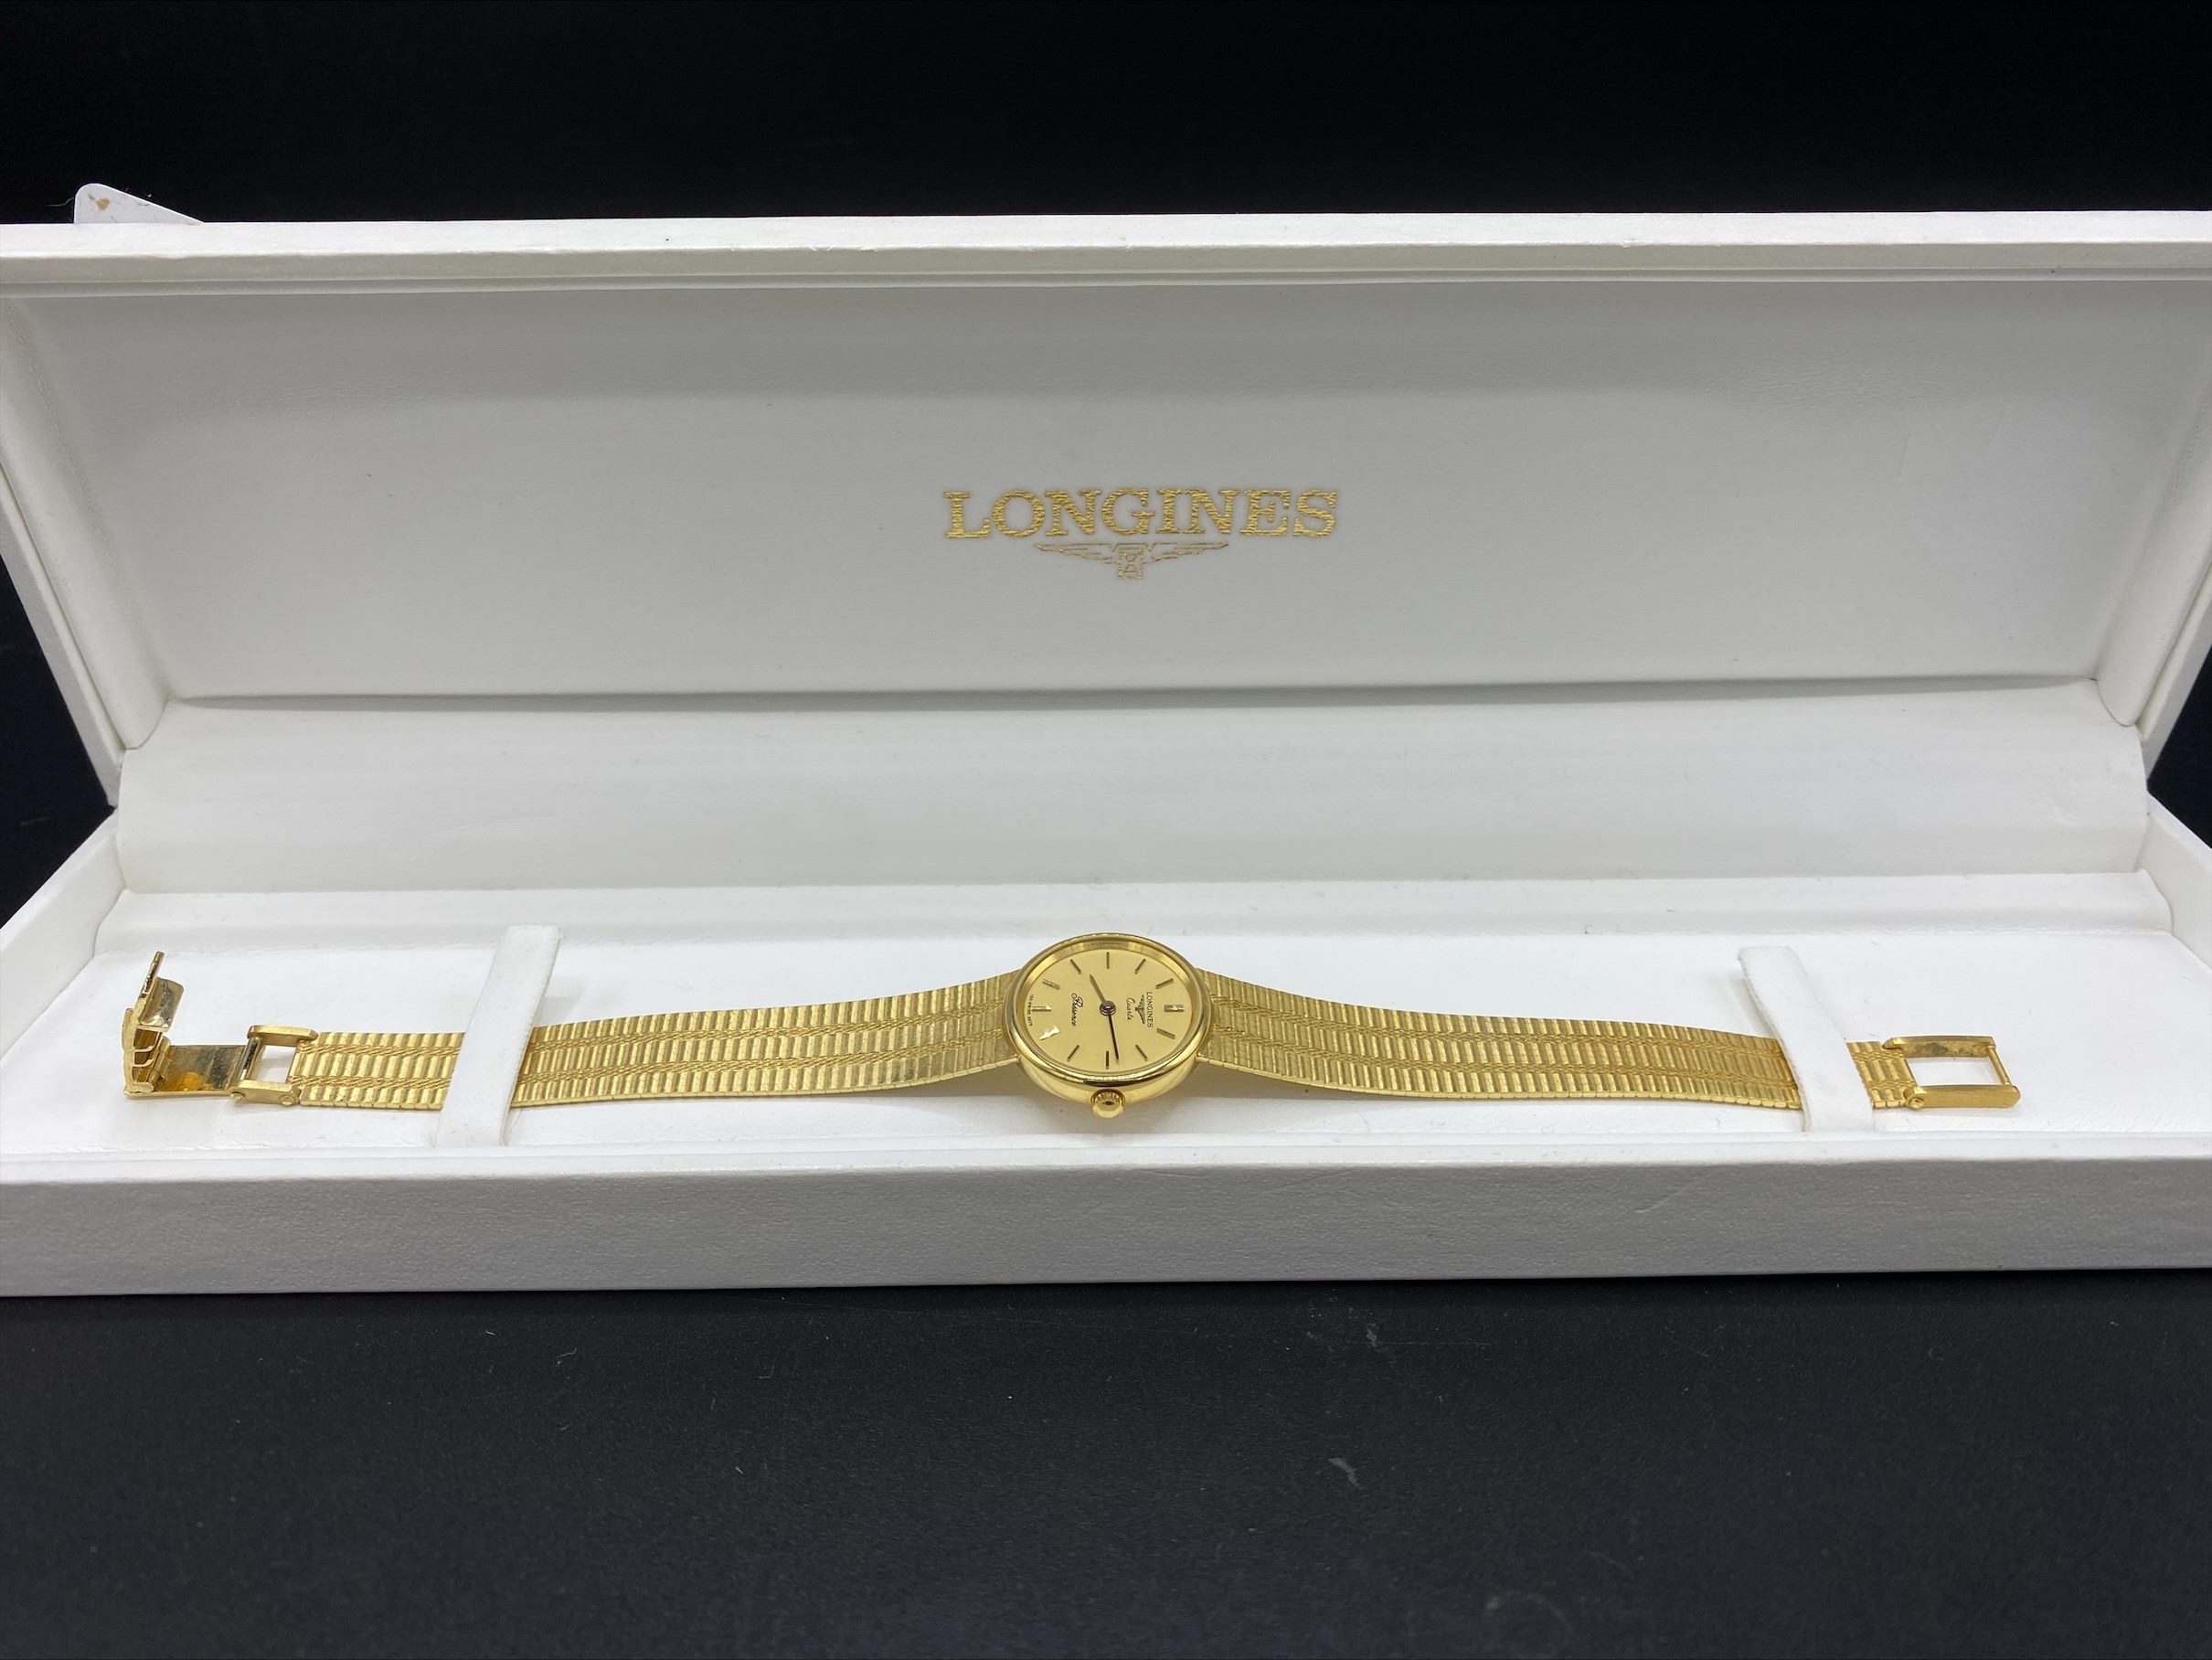 Longines 'Presence' quartz ladies' wrist watch with hallmarked 9ct gold case and strap - Image 5 of 5